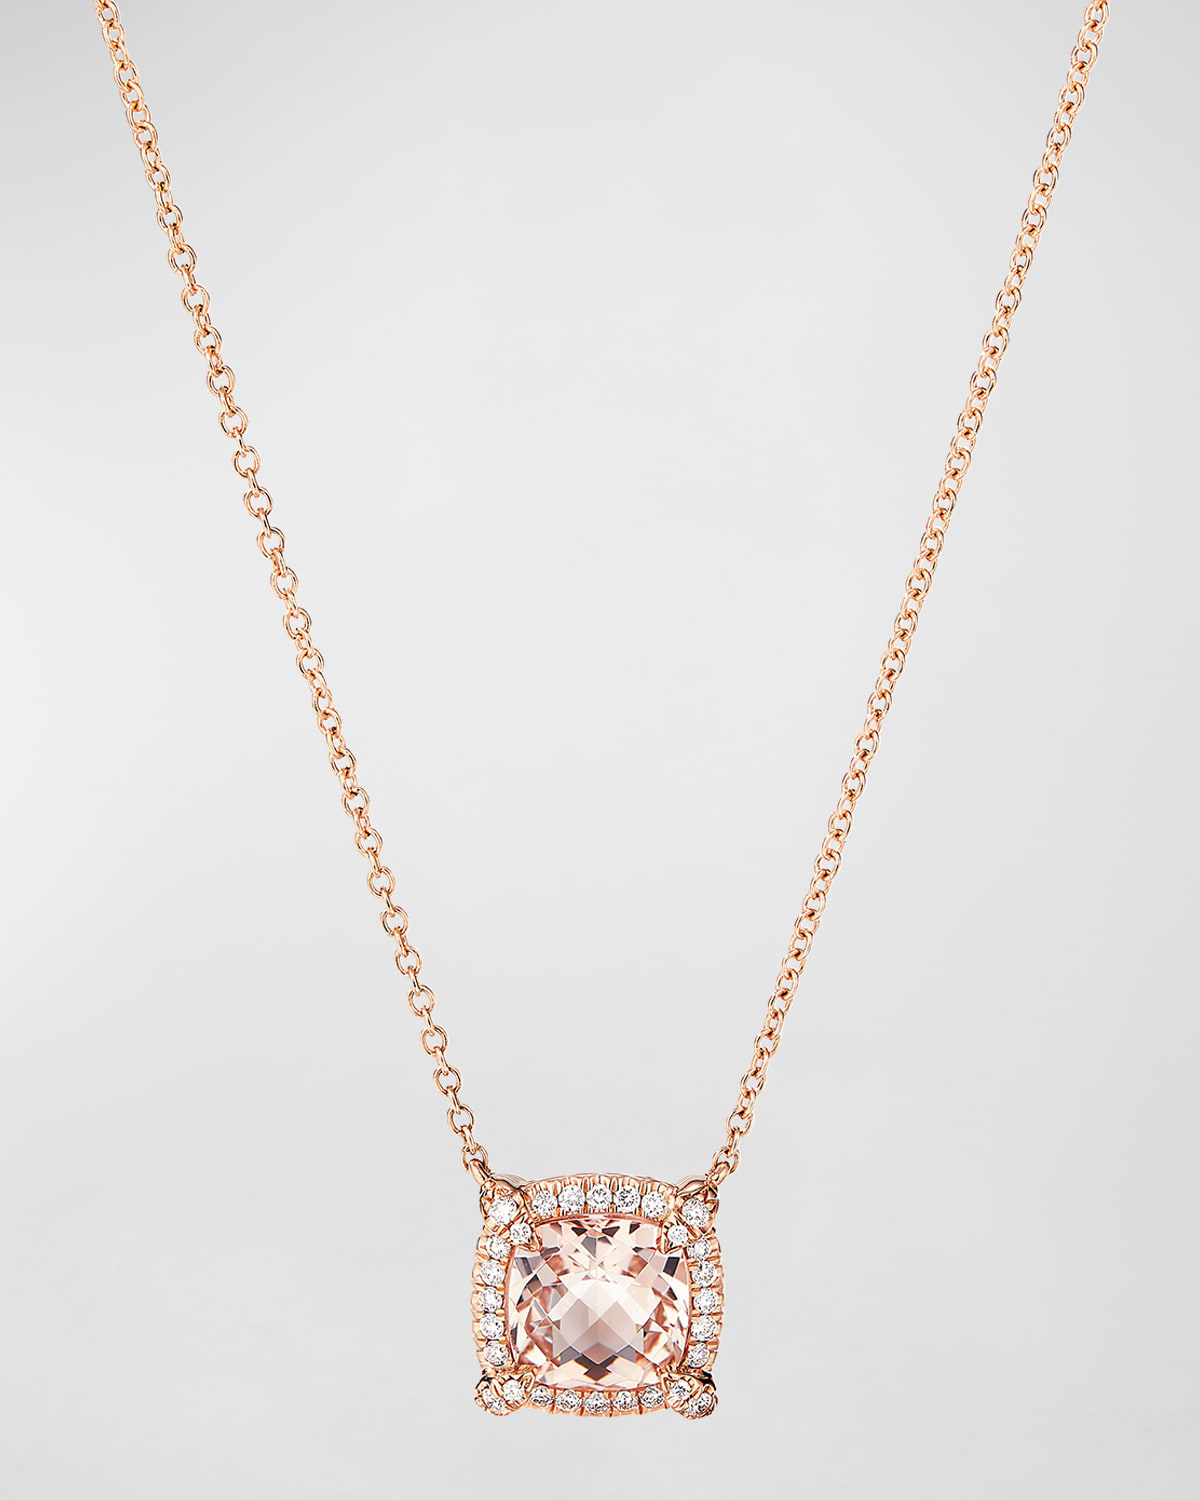 DAVID YURMAN PETITE CHATELAINE PAVE BEZEL PENDANT NECKLACE IN 18K YELLOW GOLD WITH MORGANITE